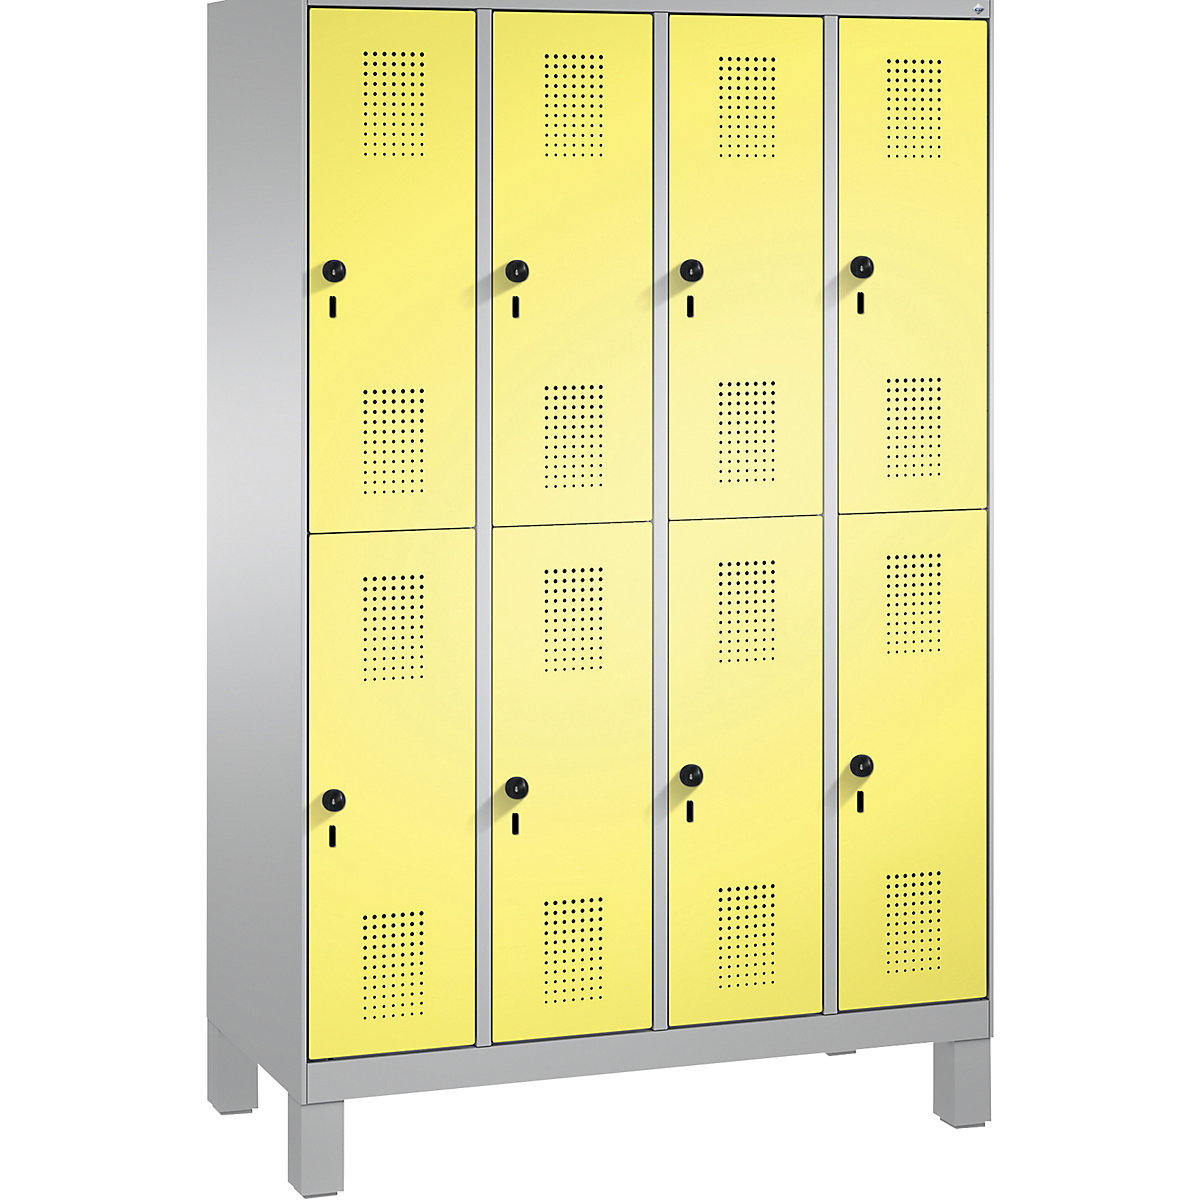 EVOLO cloakroom locker, double tier, with feet – C+P, 4 compartments, 2 shelf compartments each, compartment width 300 mm, white aluminium / sulphur yellow-7